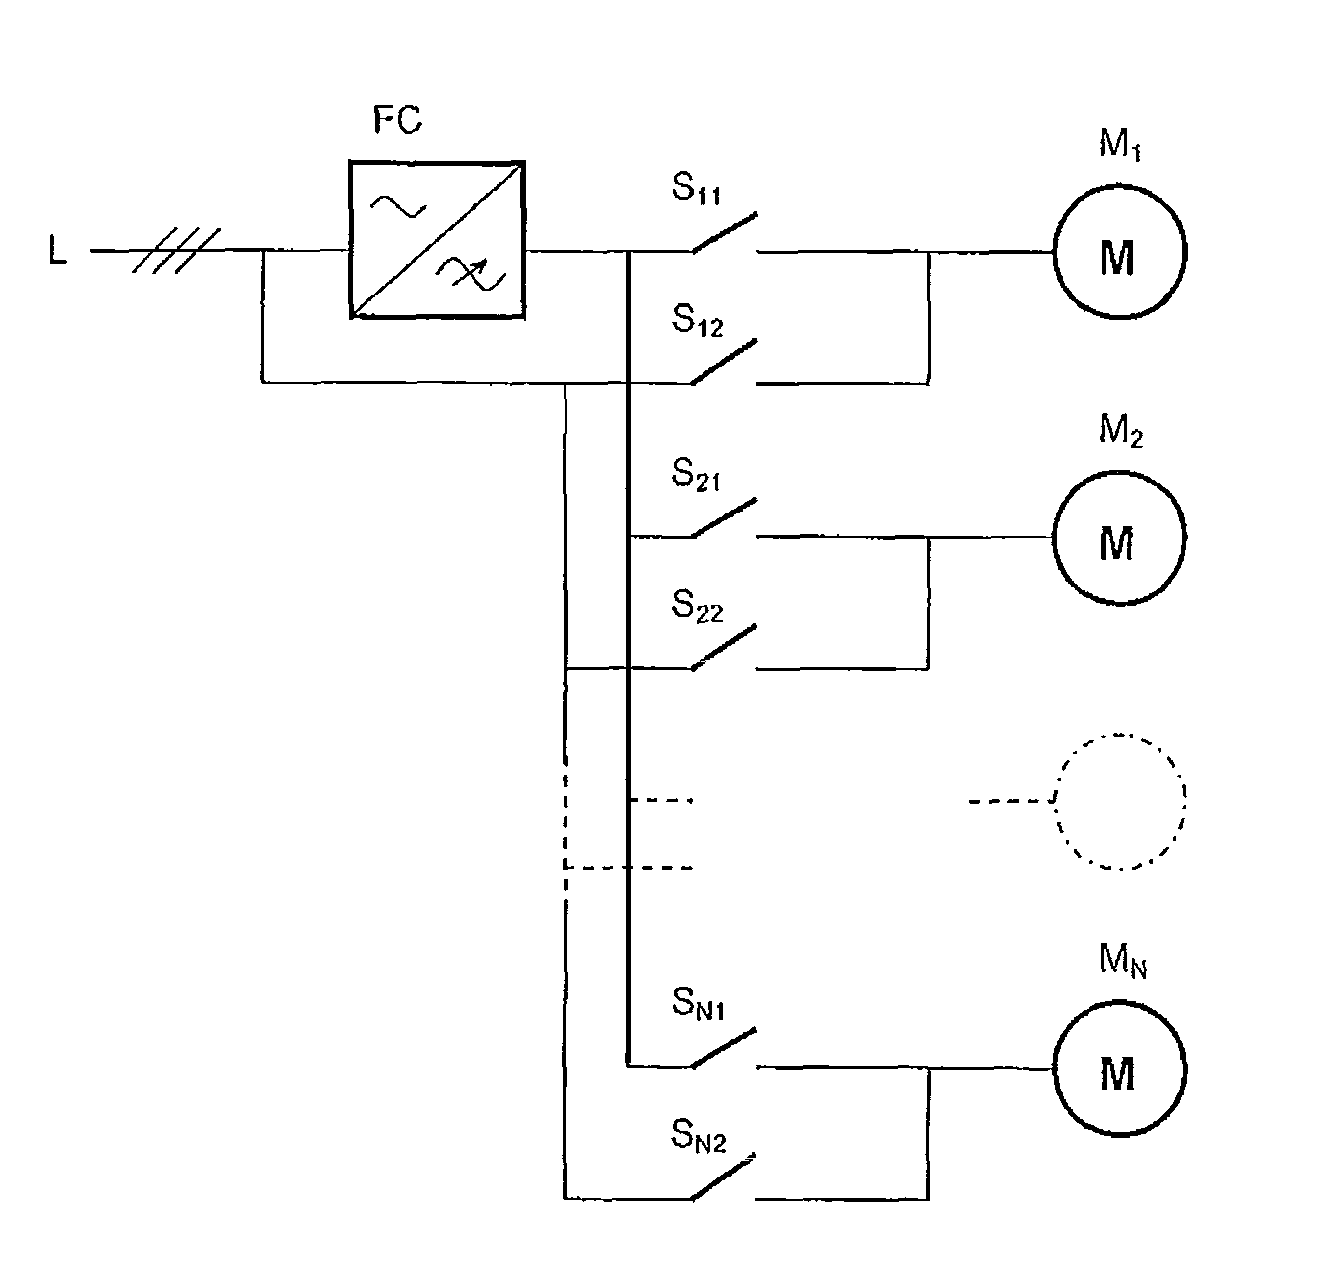 Connection of an electric motor to a supply network